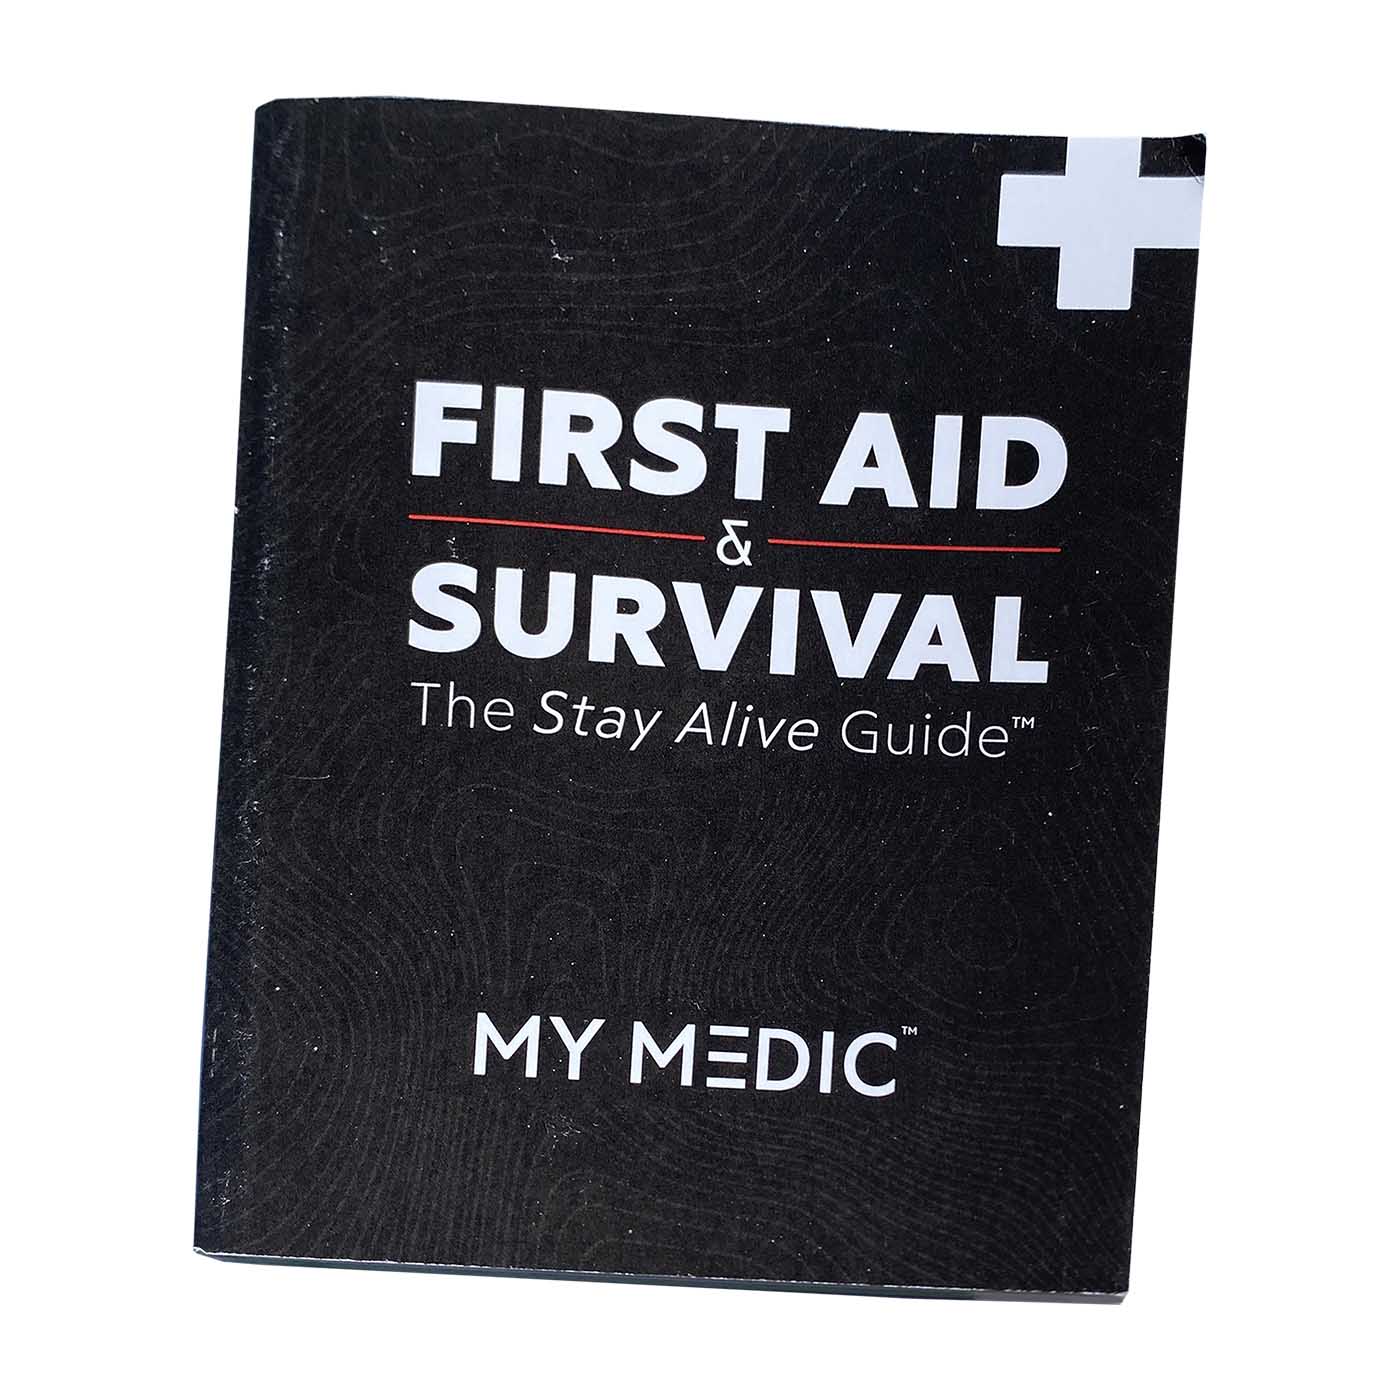 First Aid & Survival: The Stay Alive Guide